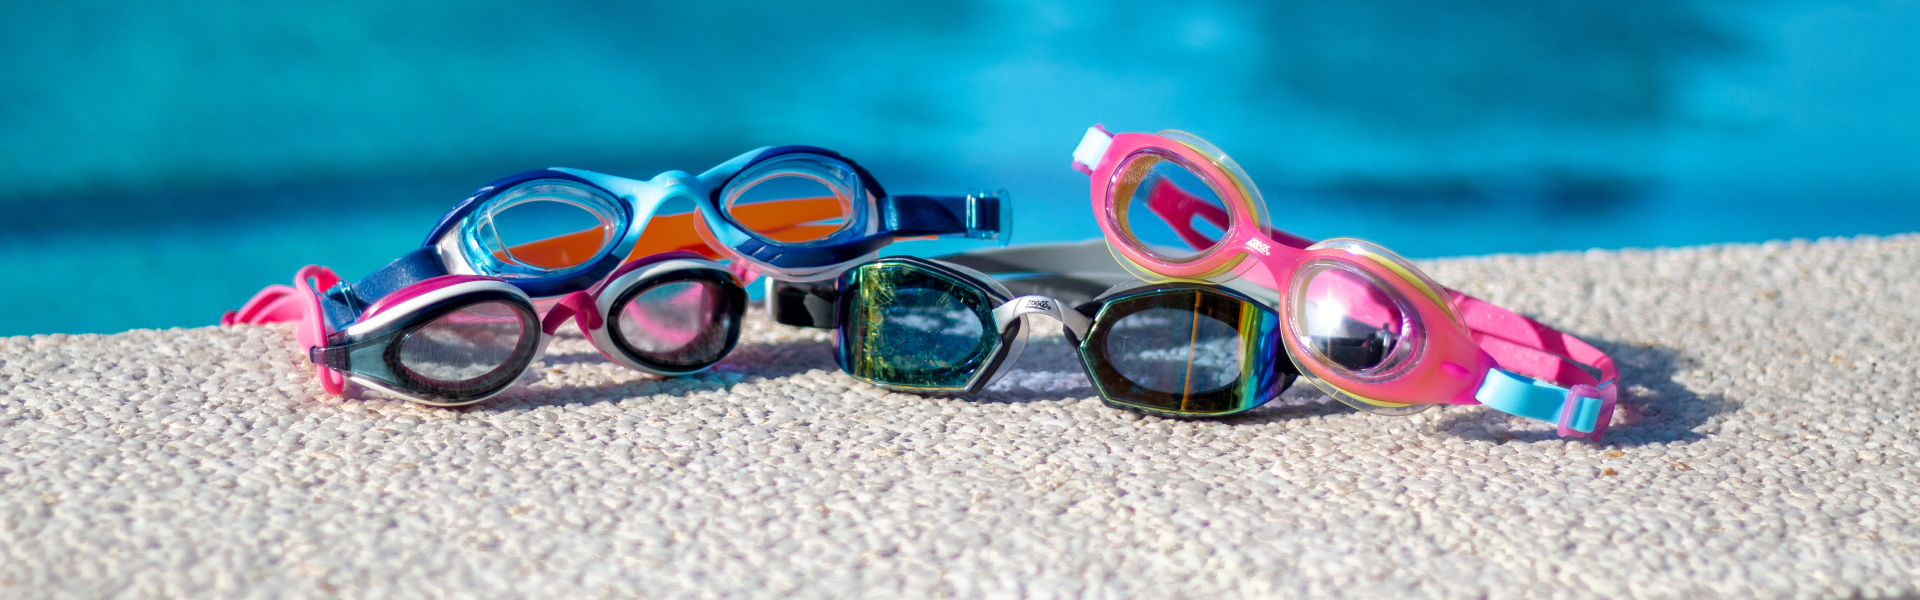 Top 4 Swimming Goggles for Indoor Training 